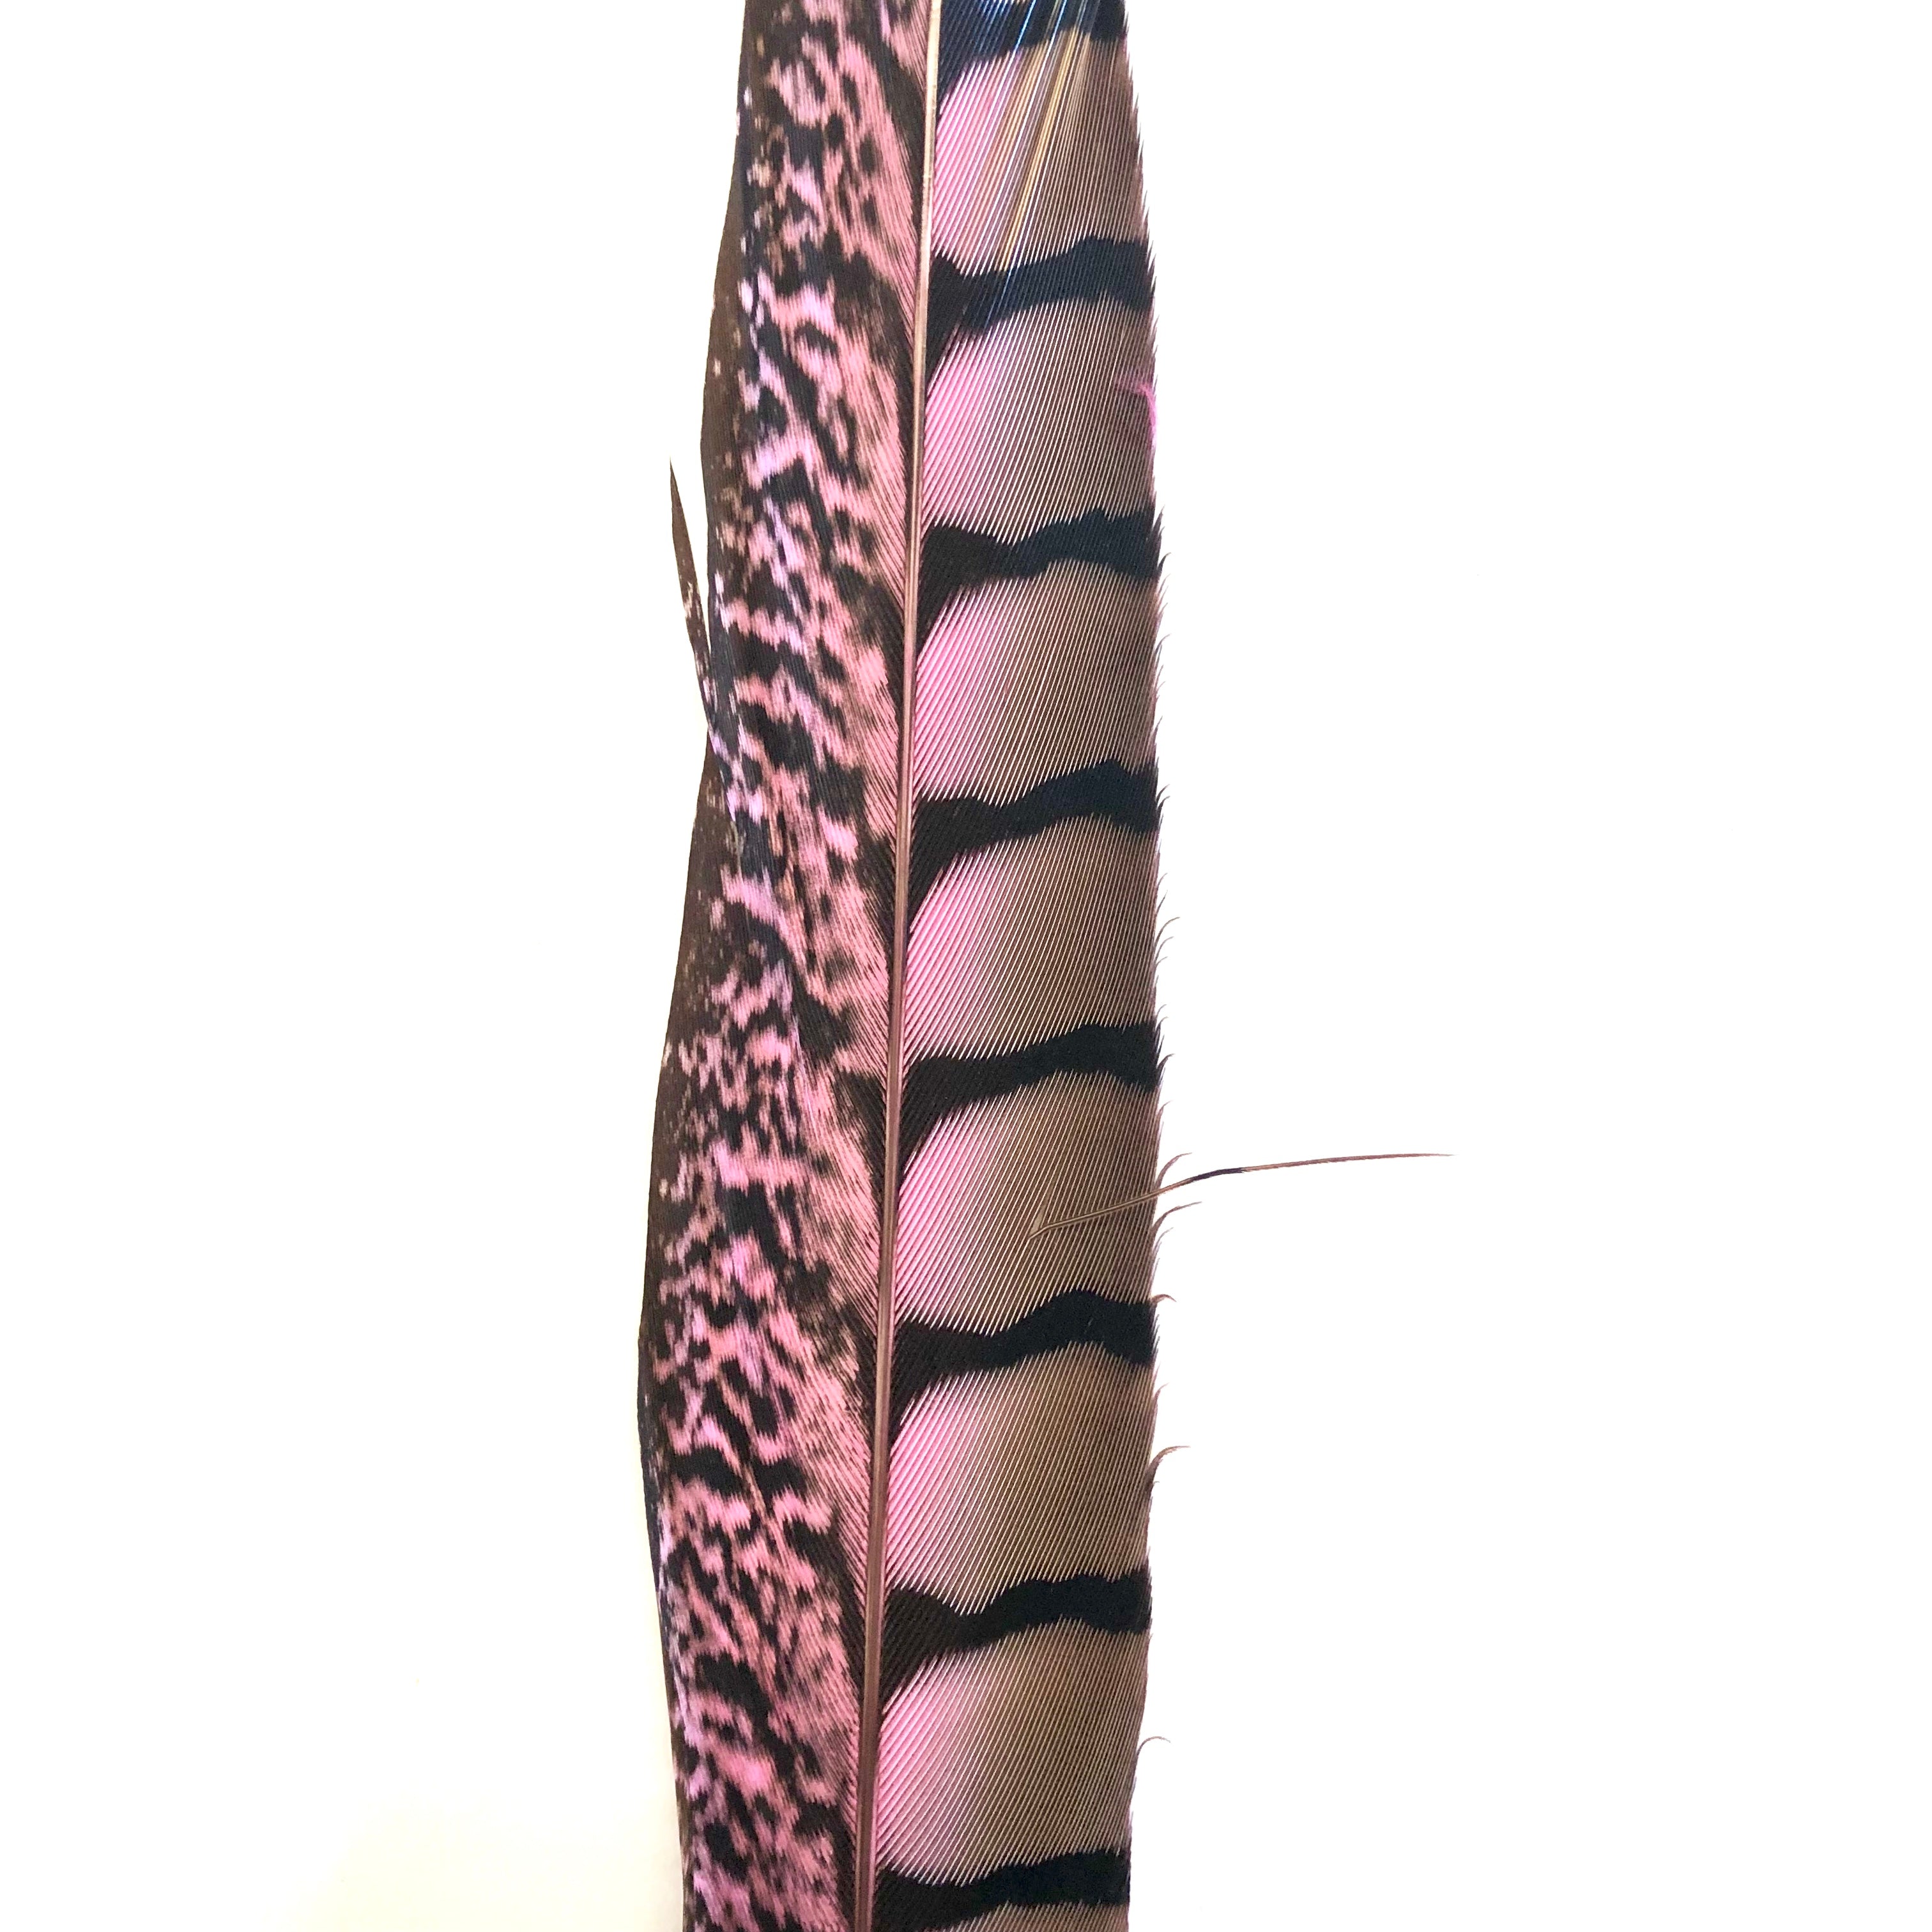 10" to 20" Lady Amherst Pheasant Side Tail Feather - Pink